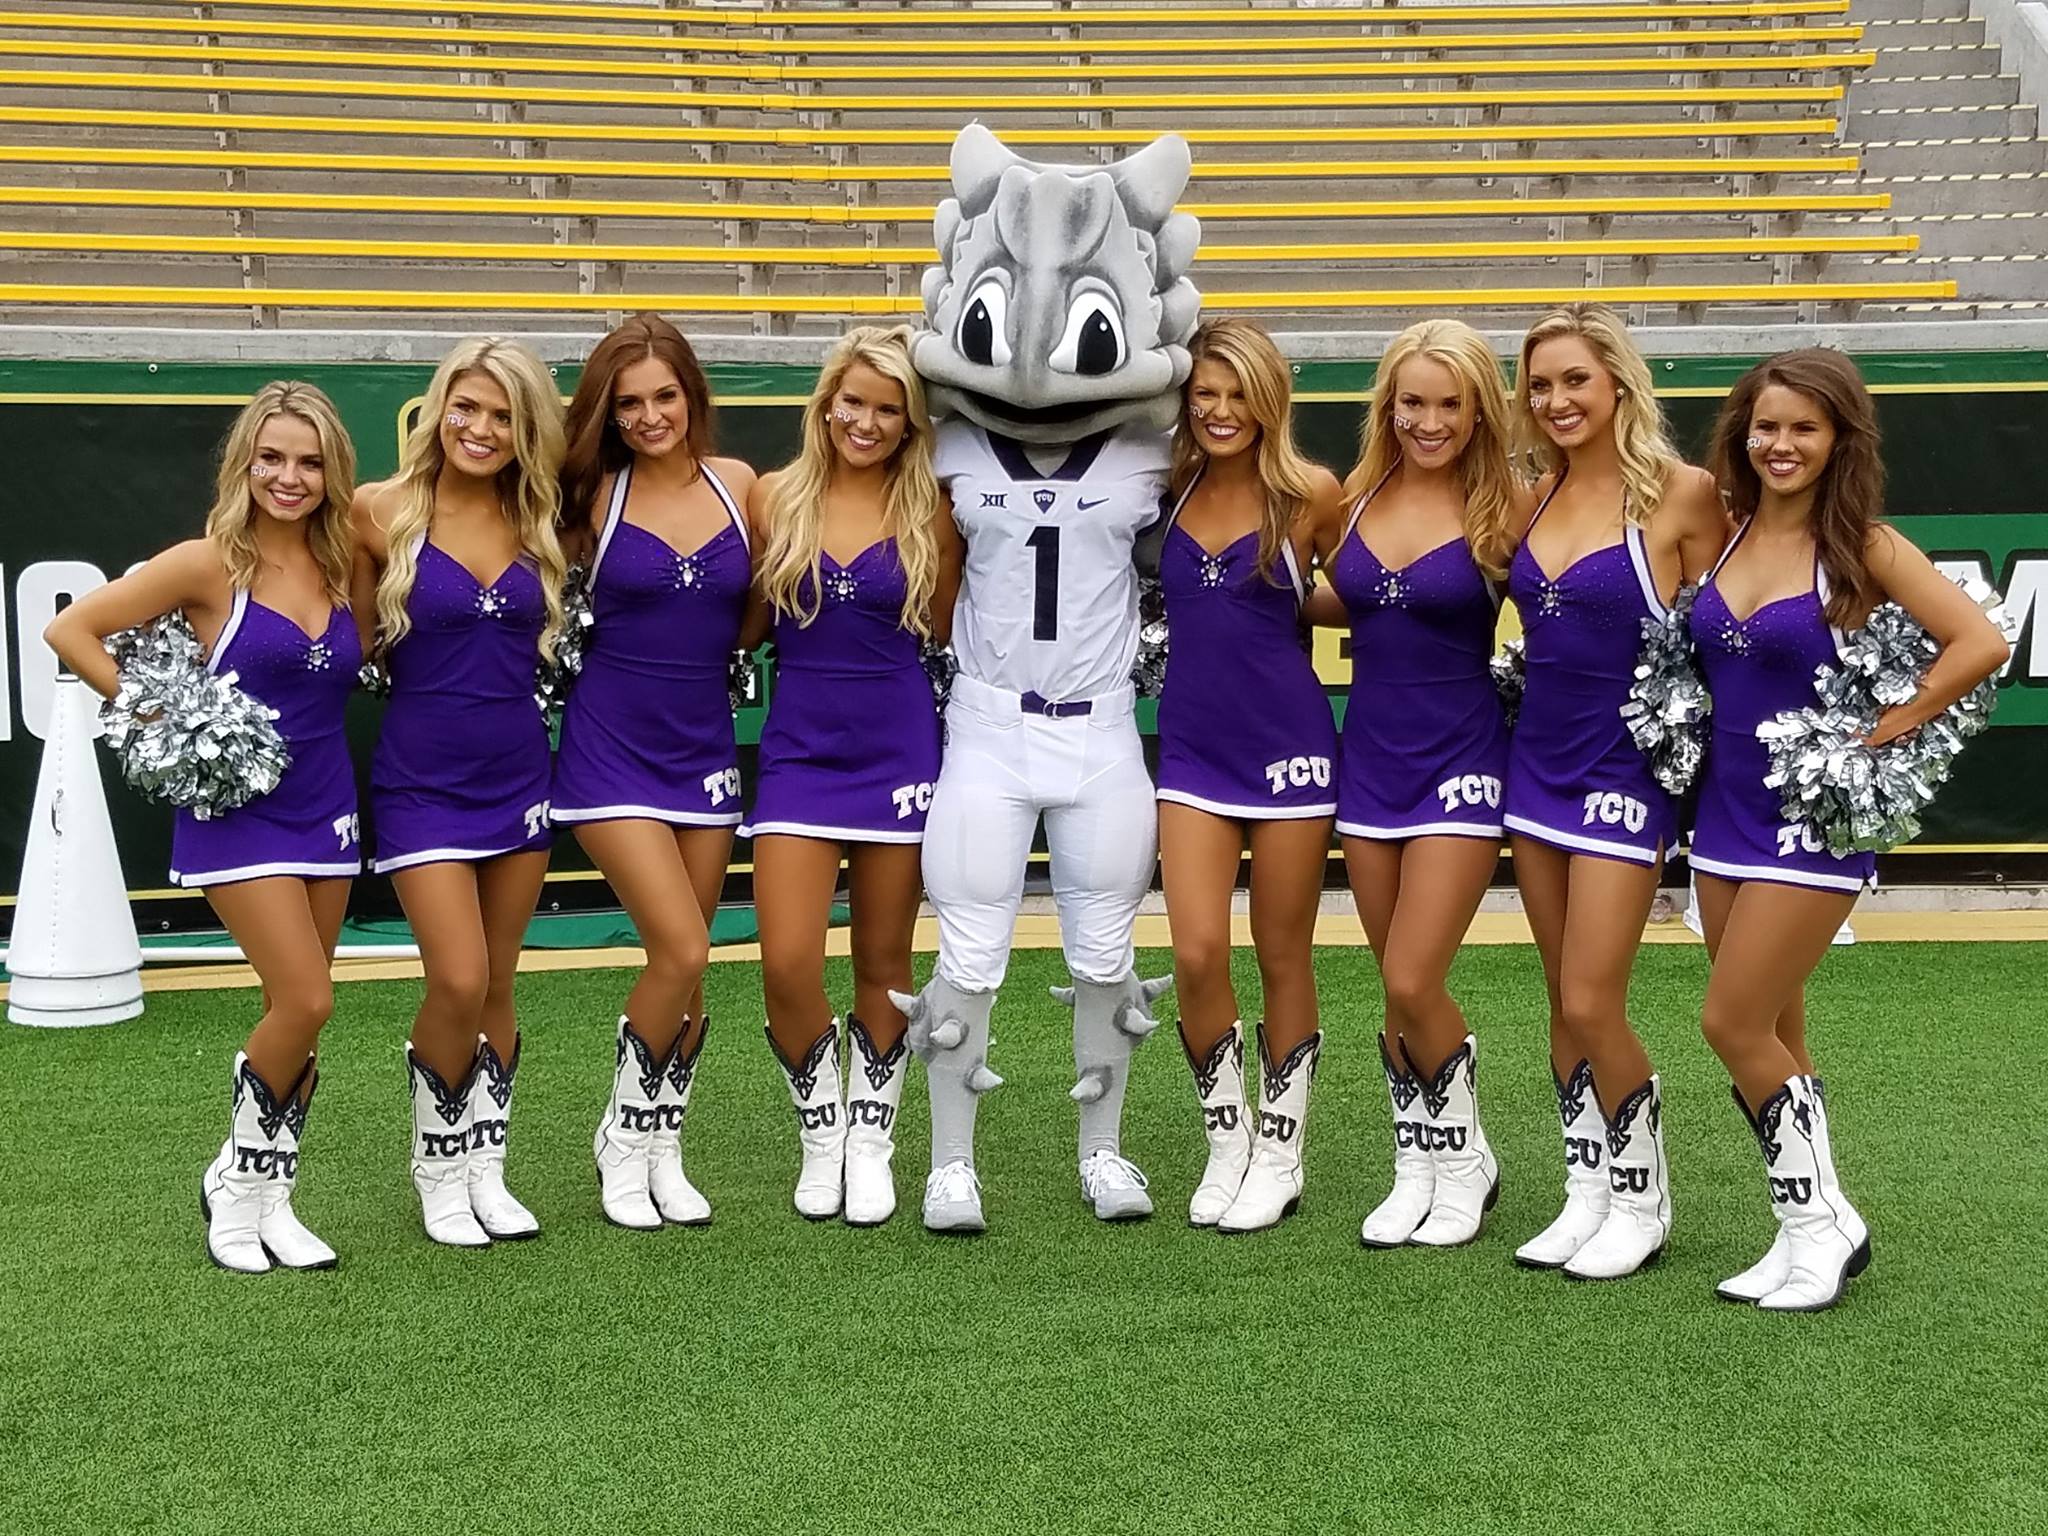 Texas Tech Red Raiders vs. TCU Horned Frogs - 10/11/2018 Free Pick & CFB Betting Prediction